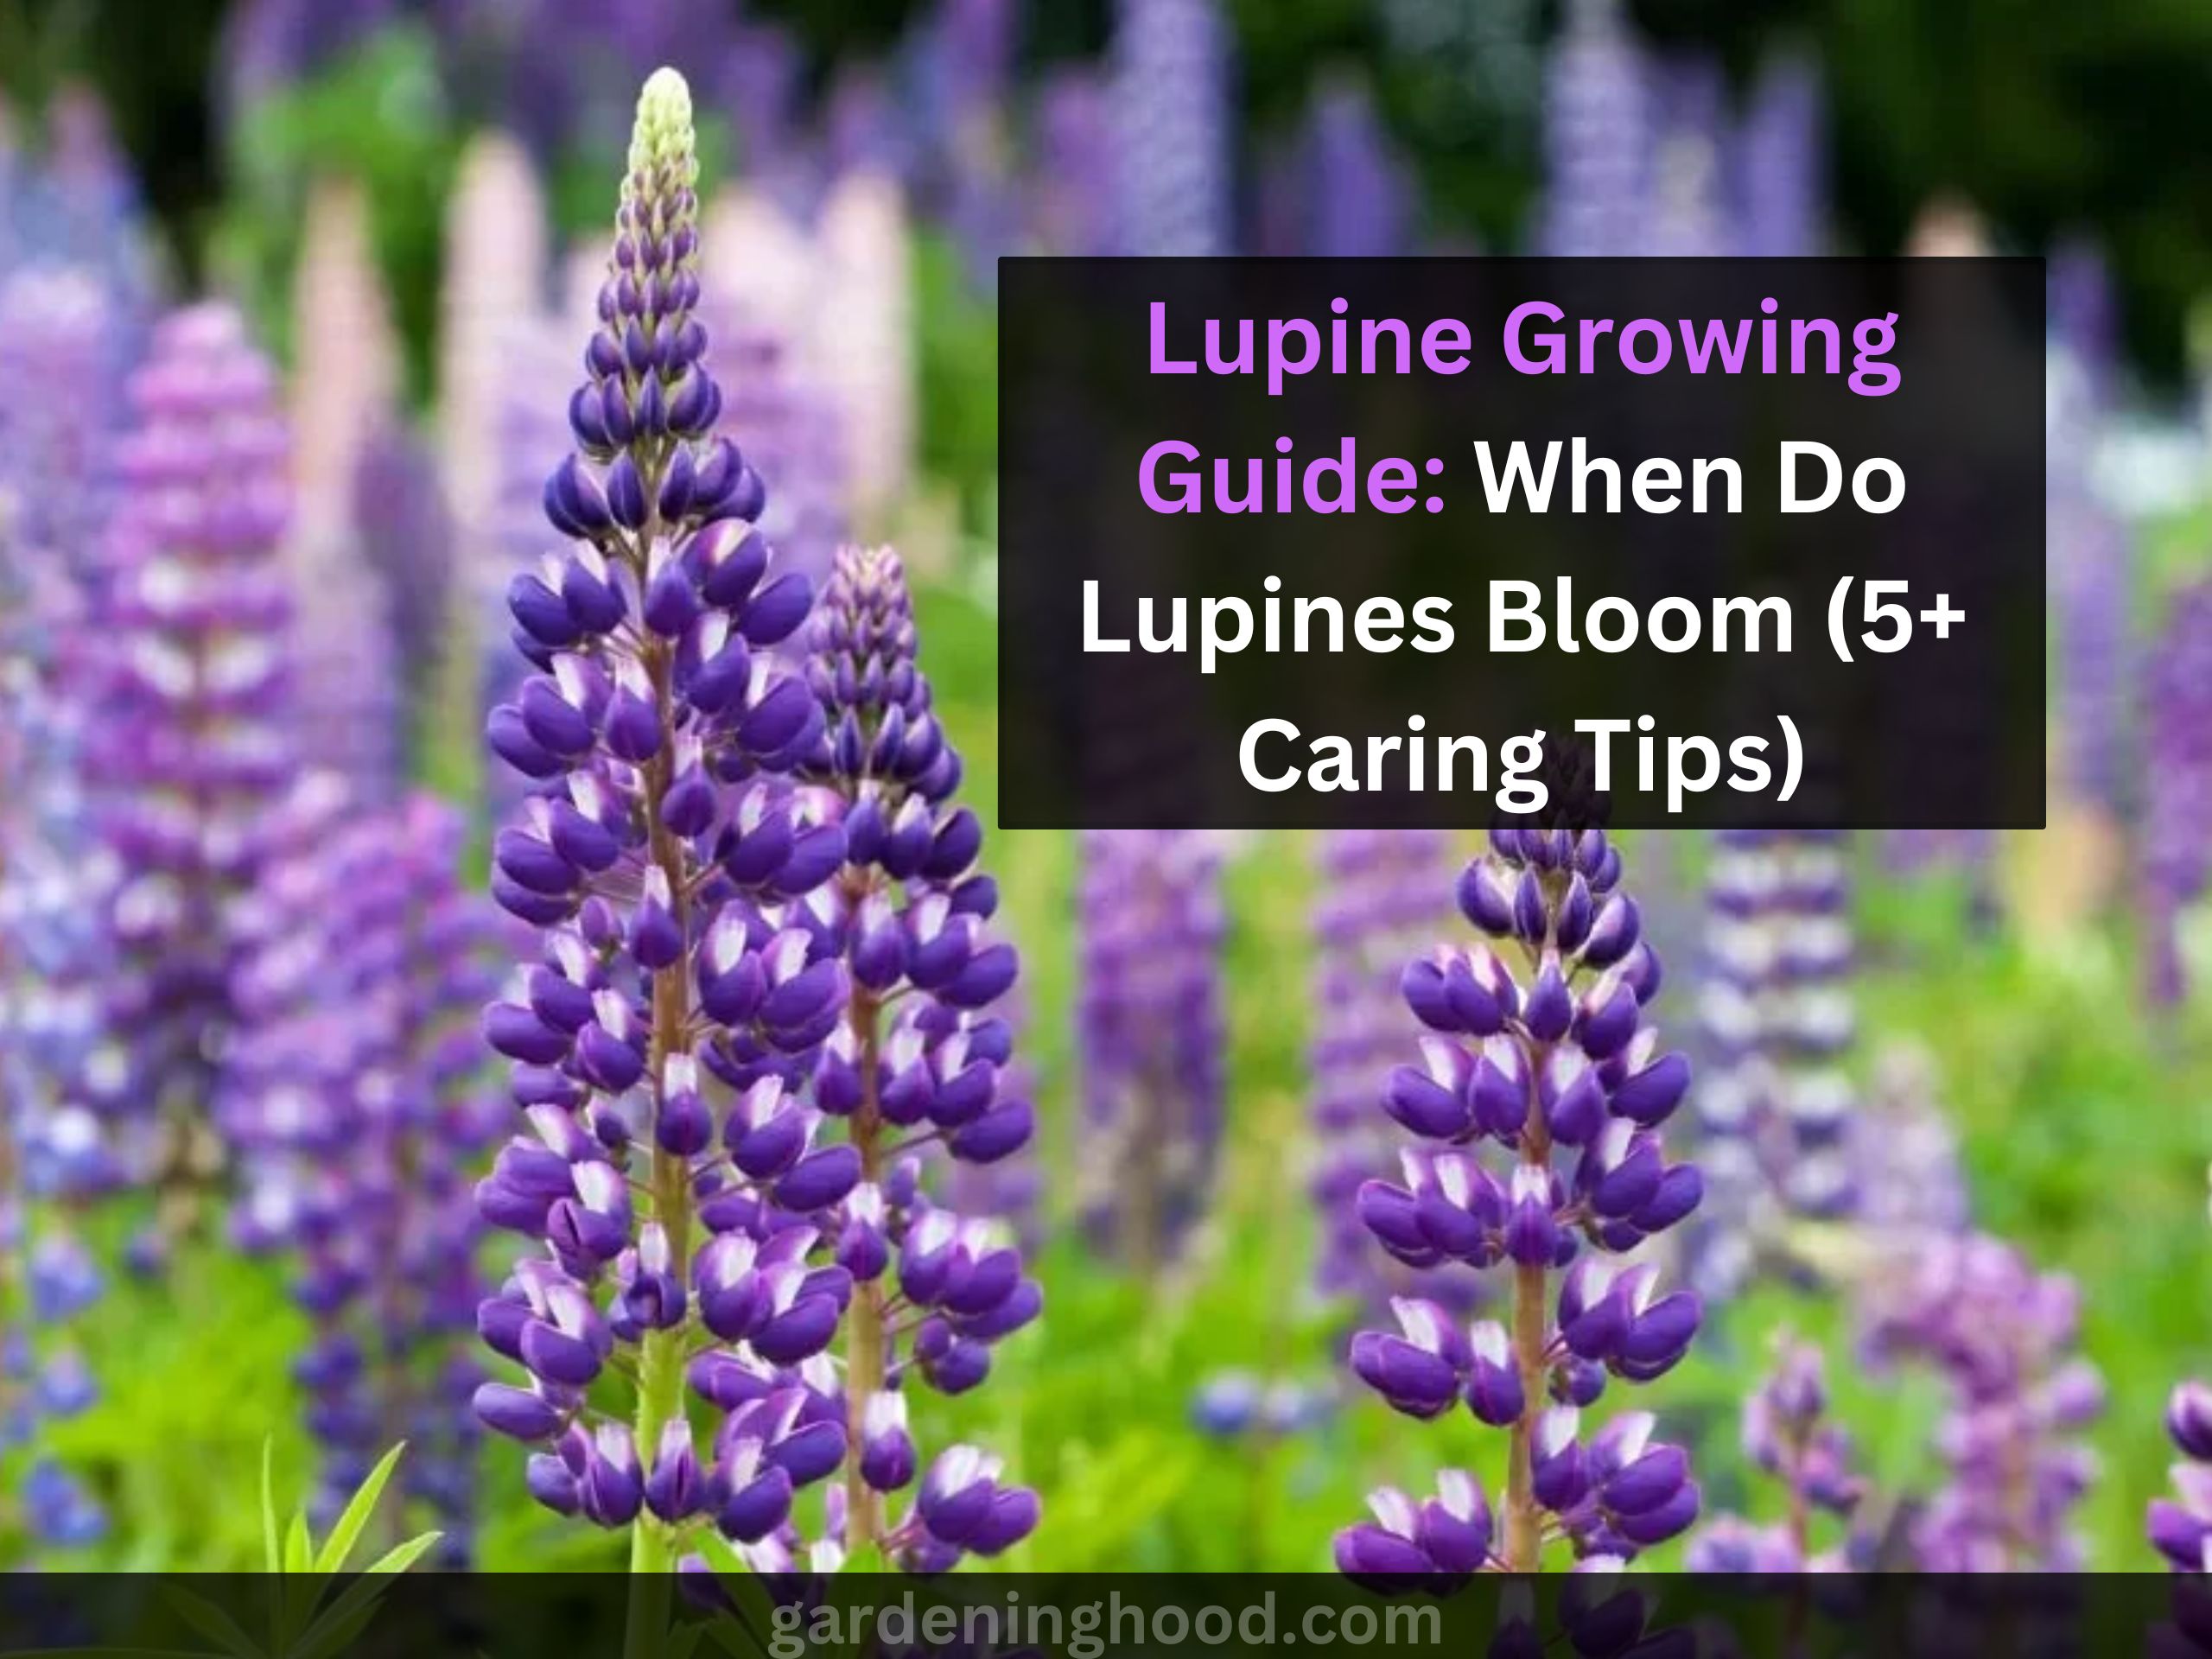 Lupine Growing Guide: When Do Lupines Bloom (5+ Caring Tips)